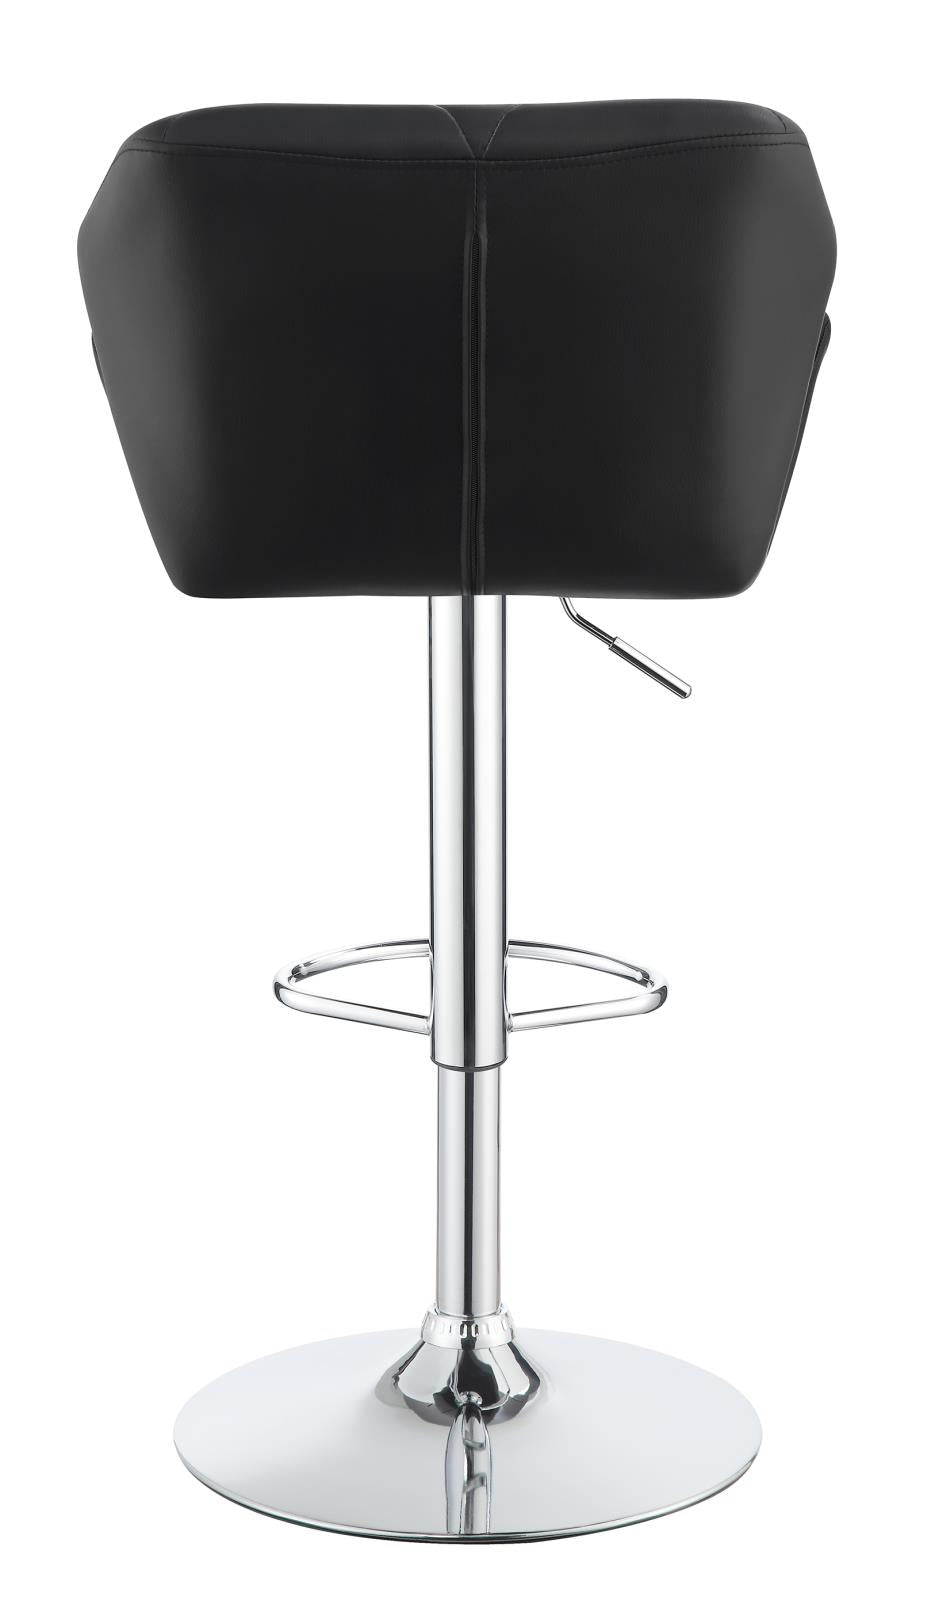 Adjustable Bar Stools Chrome and Black (Set of 2) - What A Room